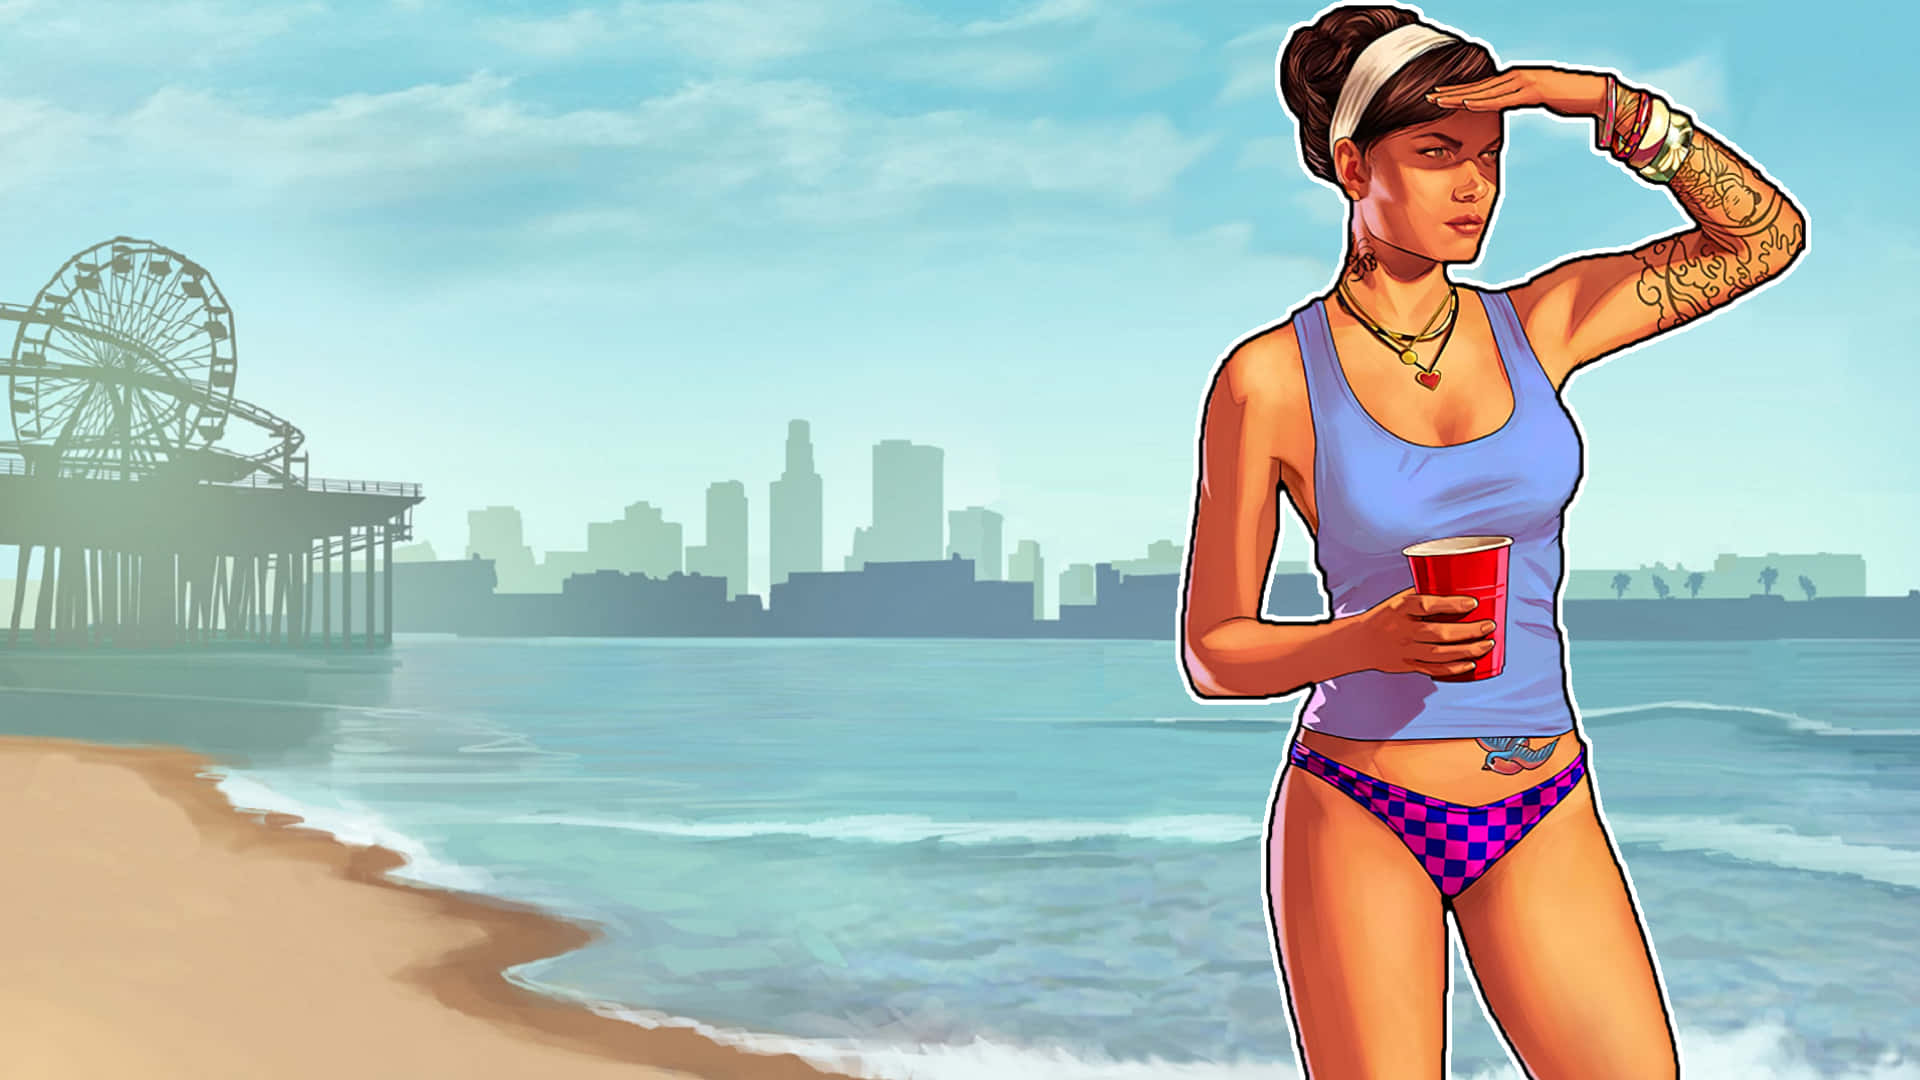 Gta Background Girl With Tattoos At The Beach Background